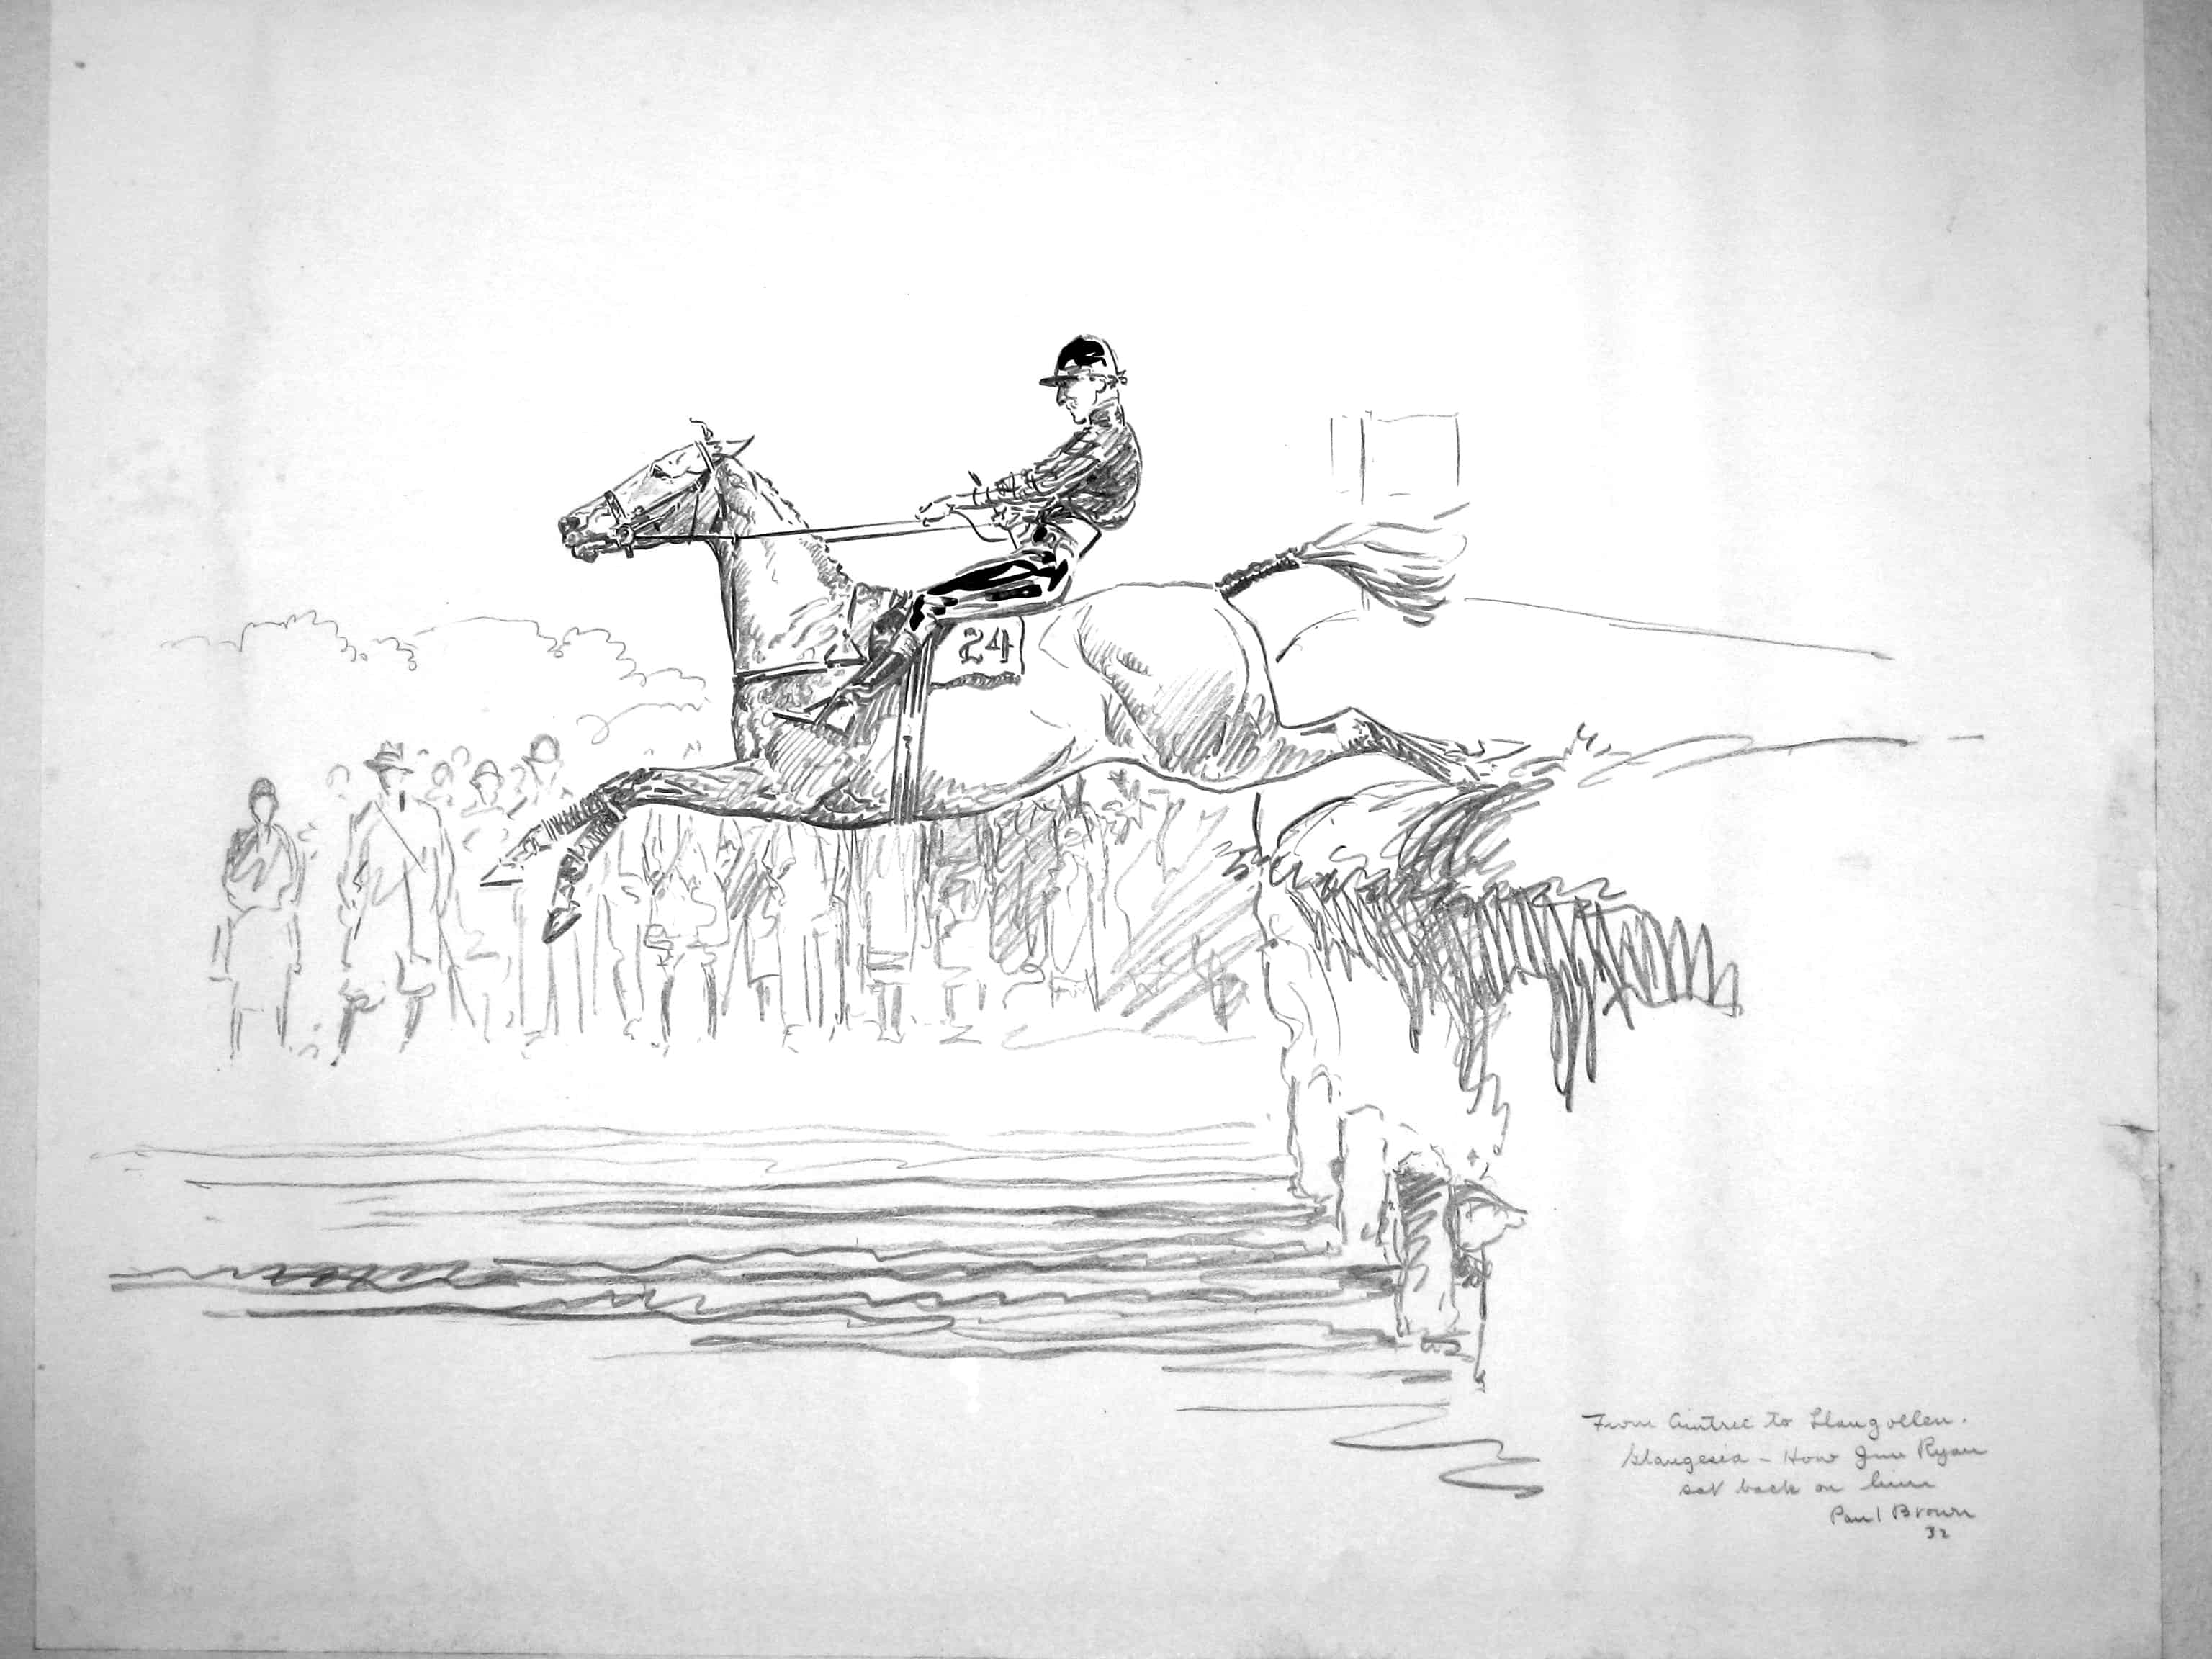 National Sporting Library & Museum Highlights Illustrator Paul Brown